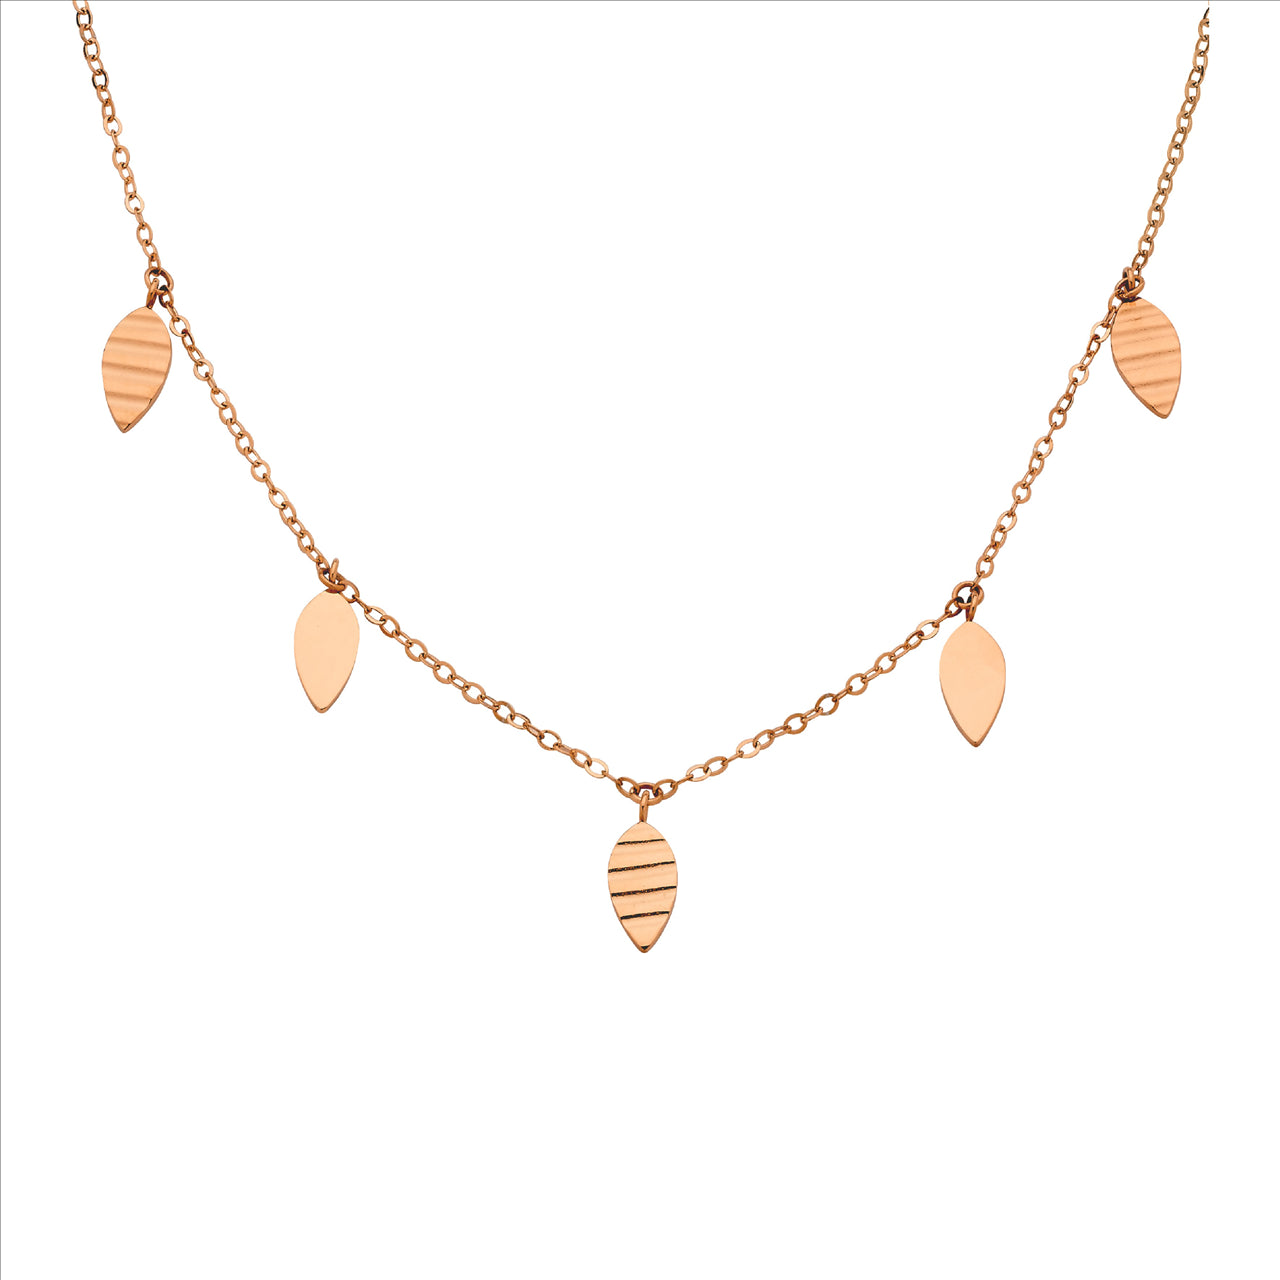 Stainless steel necklace 40+5cm, leaf feature & rose gold IP plating